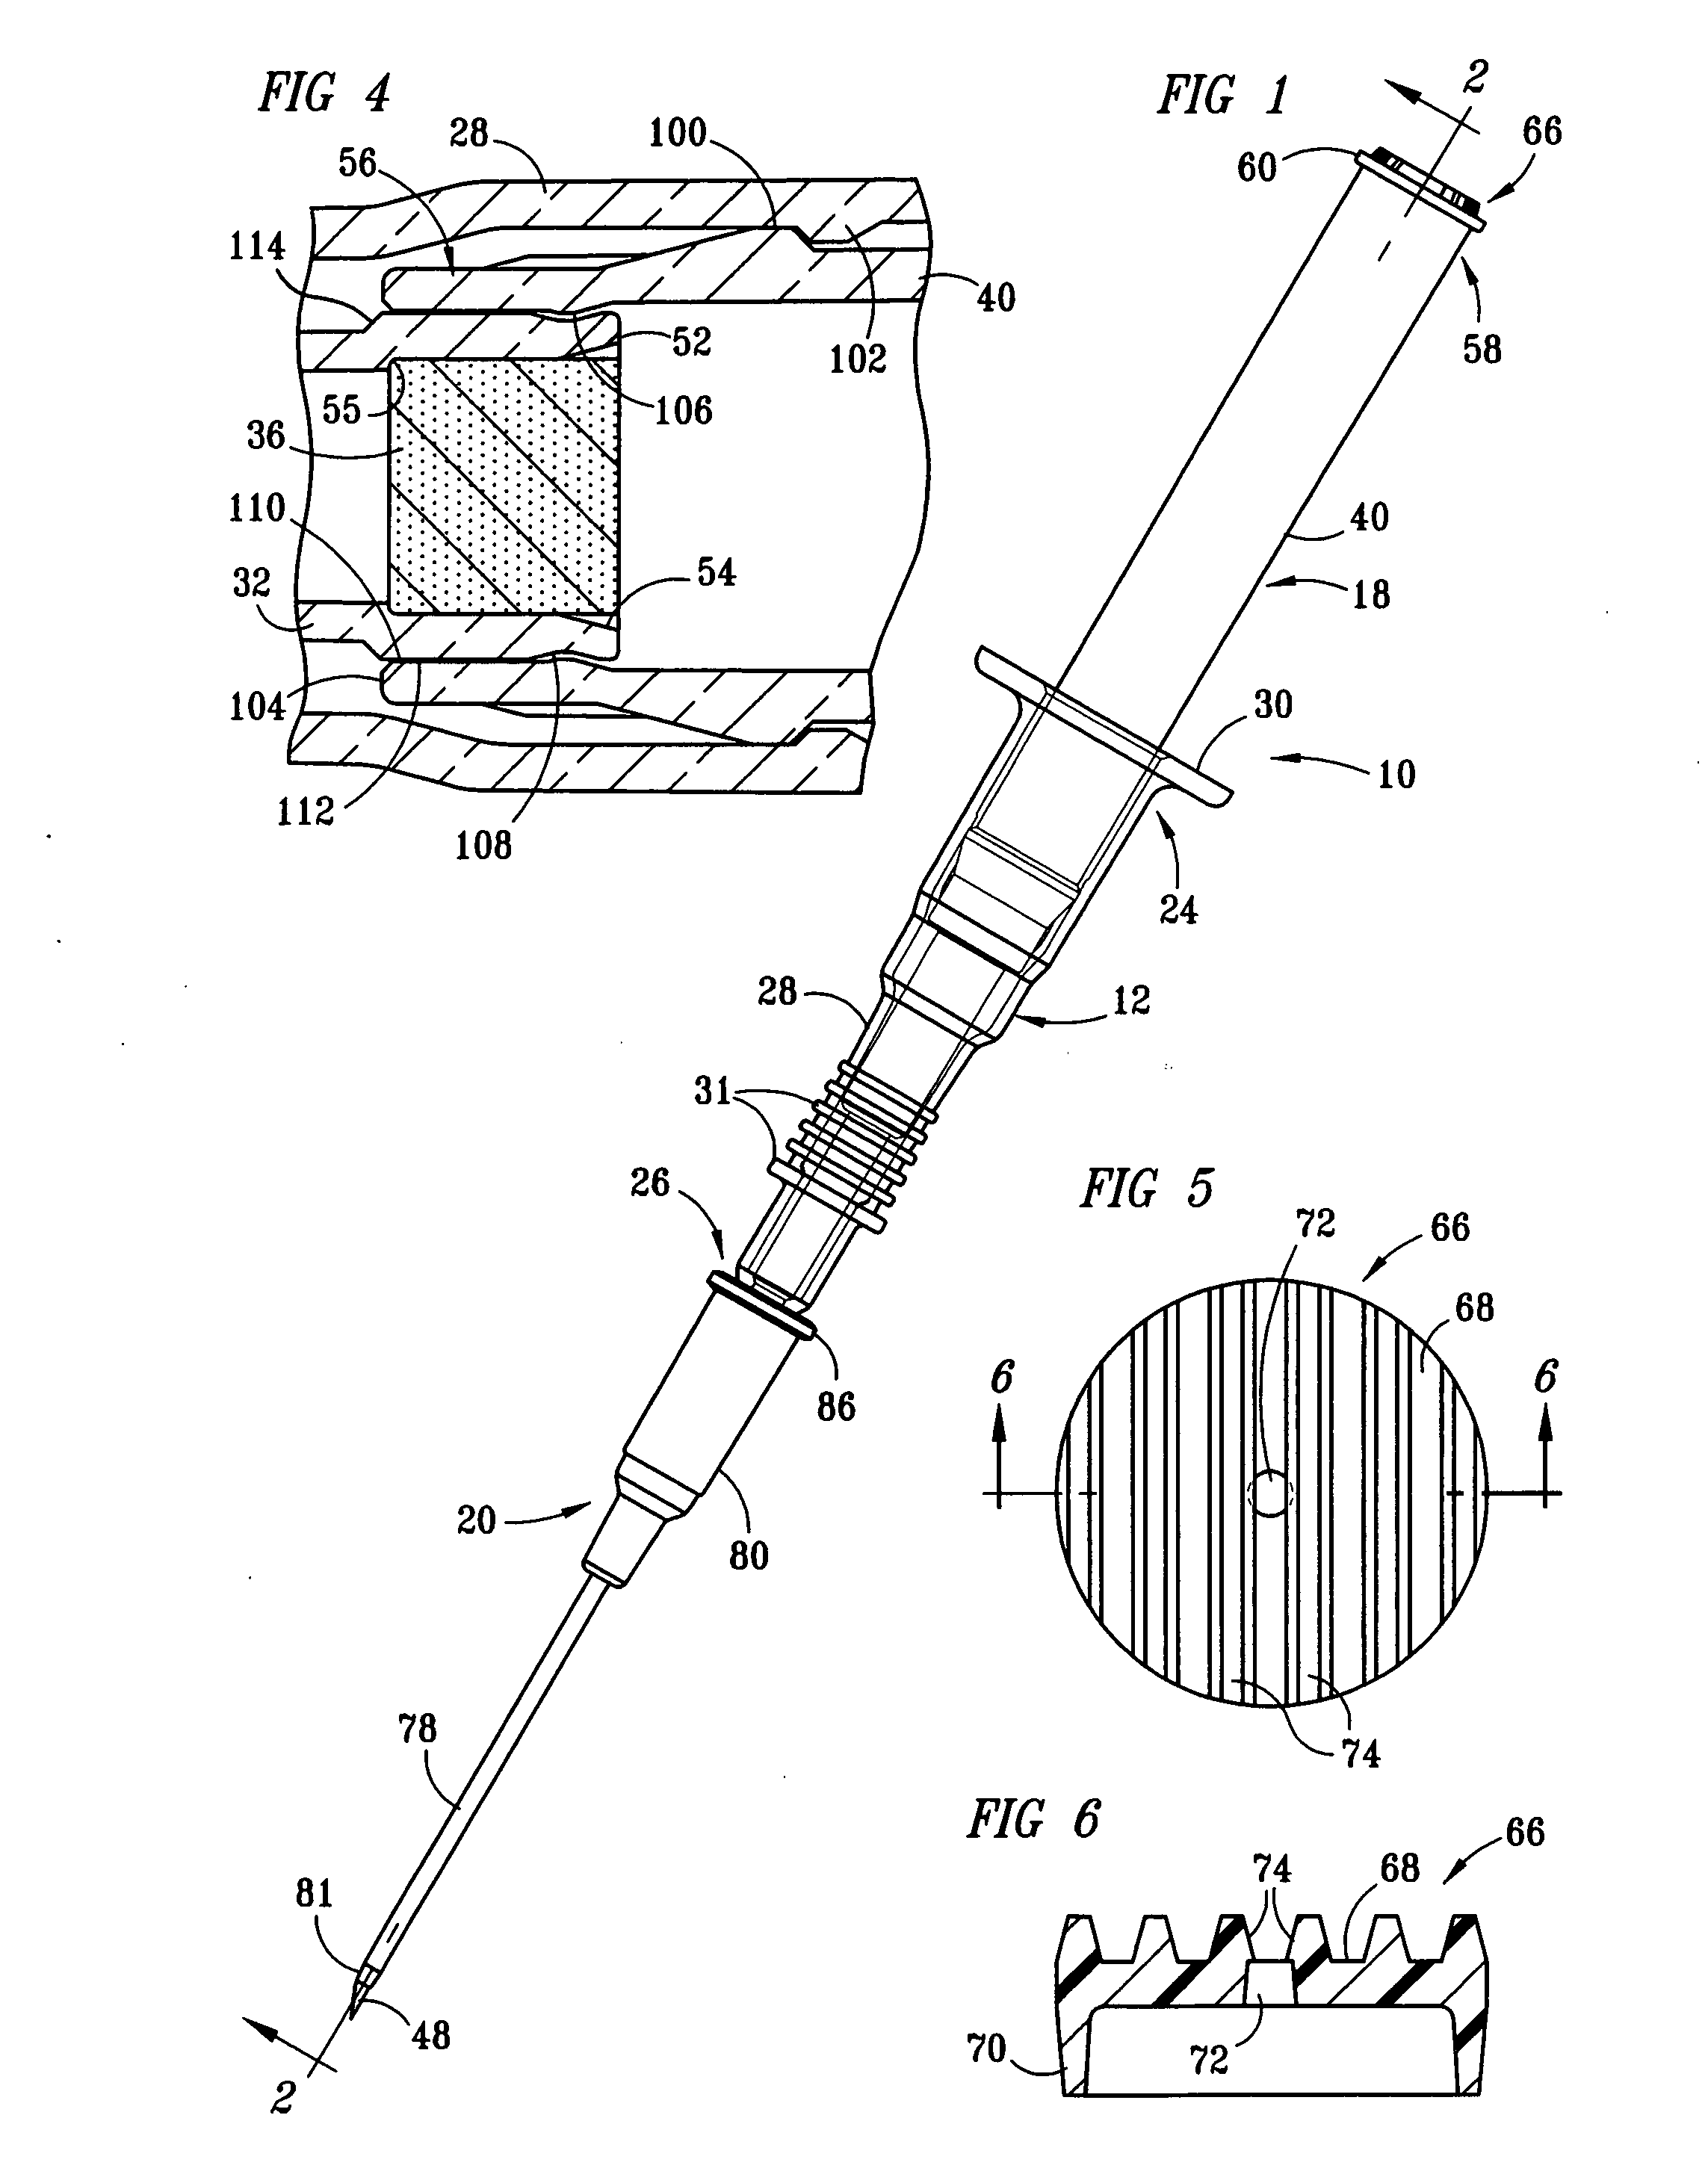 IV catheter introducer with retractable needle